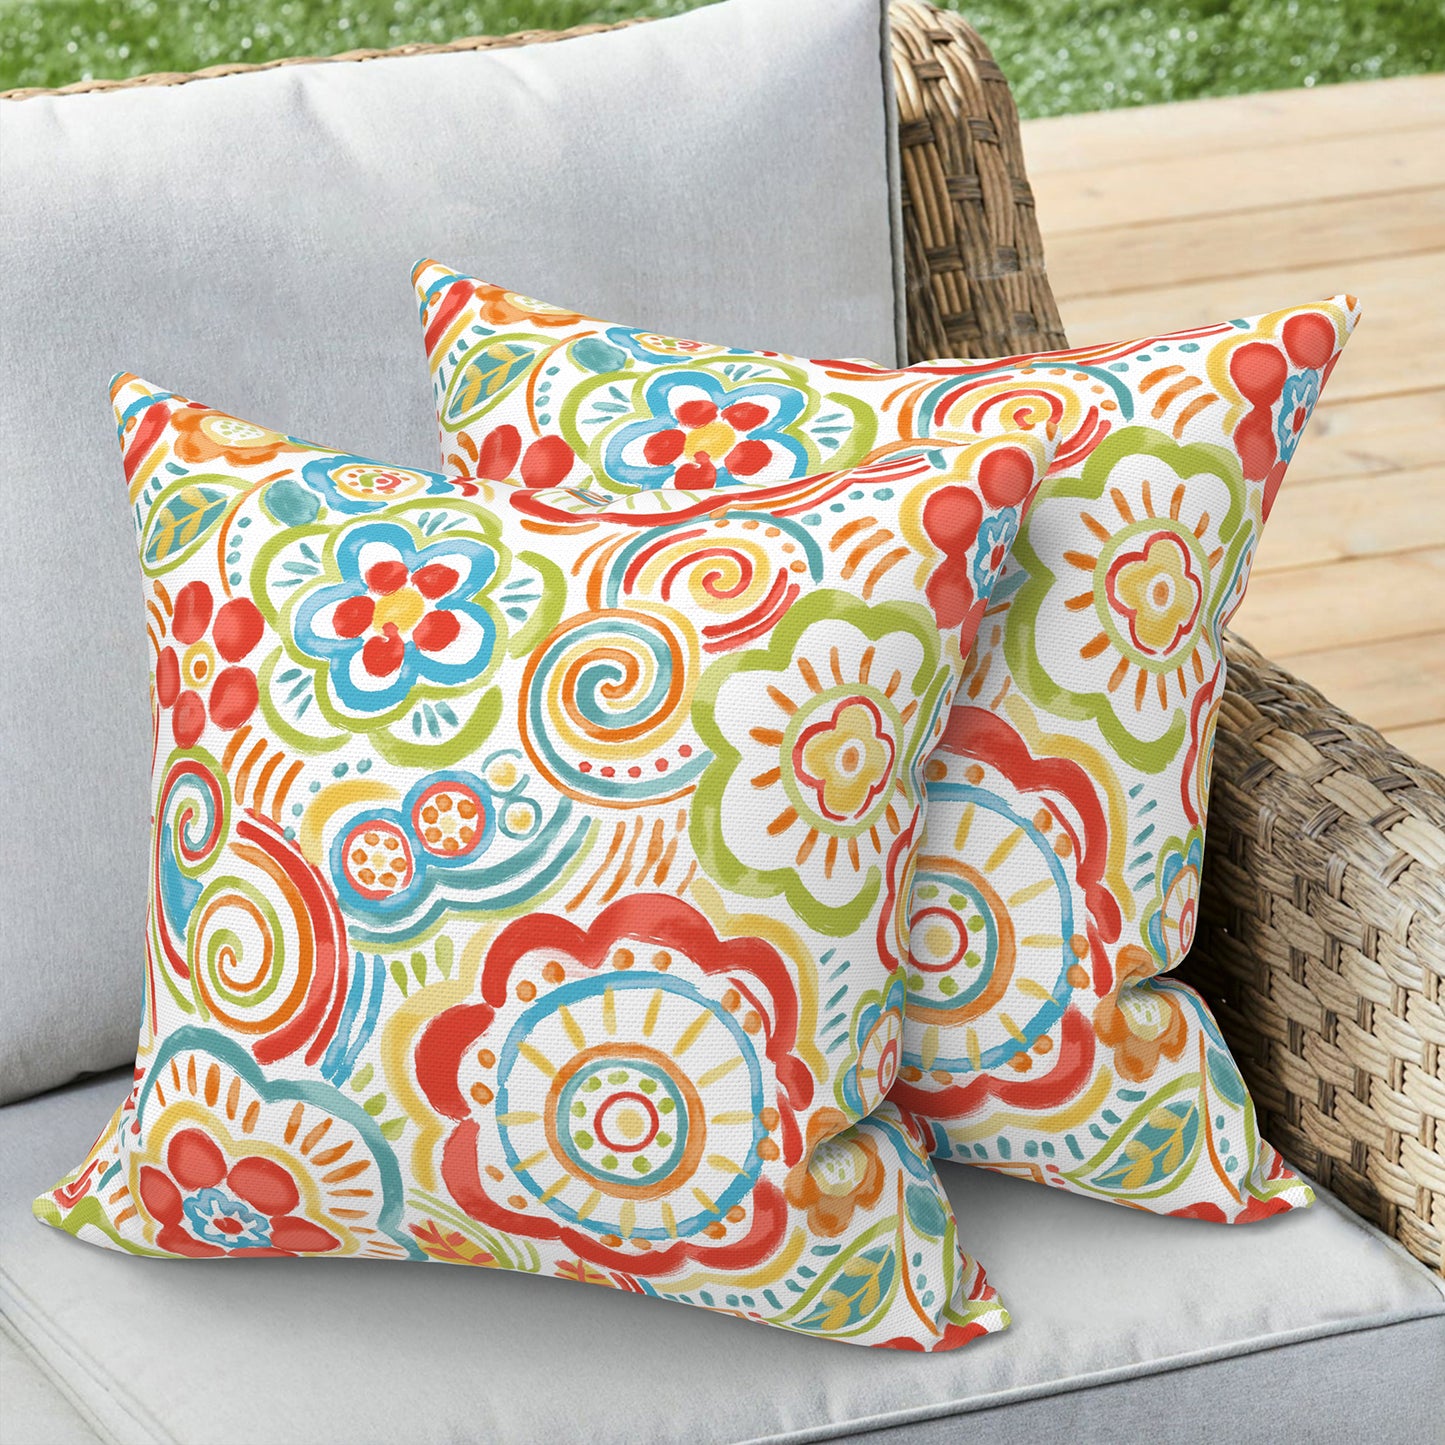 Melody Elephant Outdoor/Indoor Throw Pillow Covers Set of 2, All Weather Square Pillow Cases 16x16 Inch, Patio Cushion Pillow of Home Furniture Use, Flower Multi